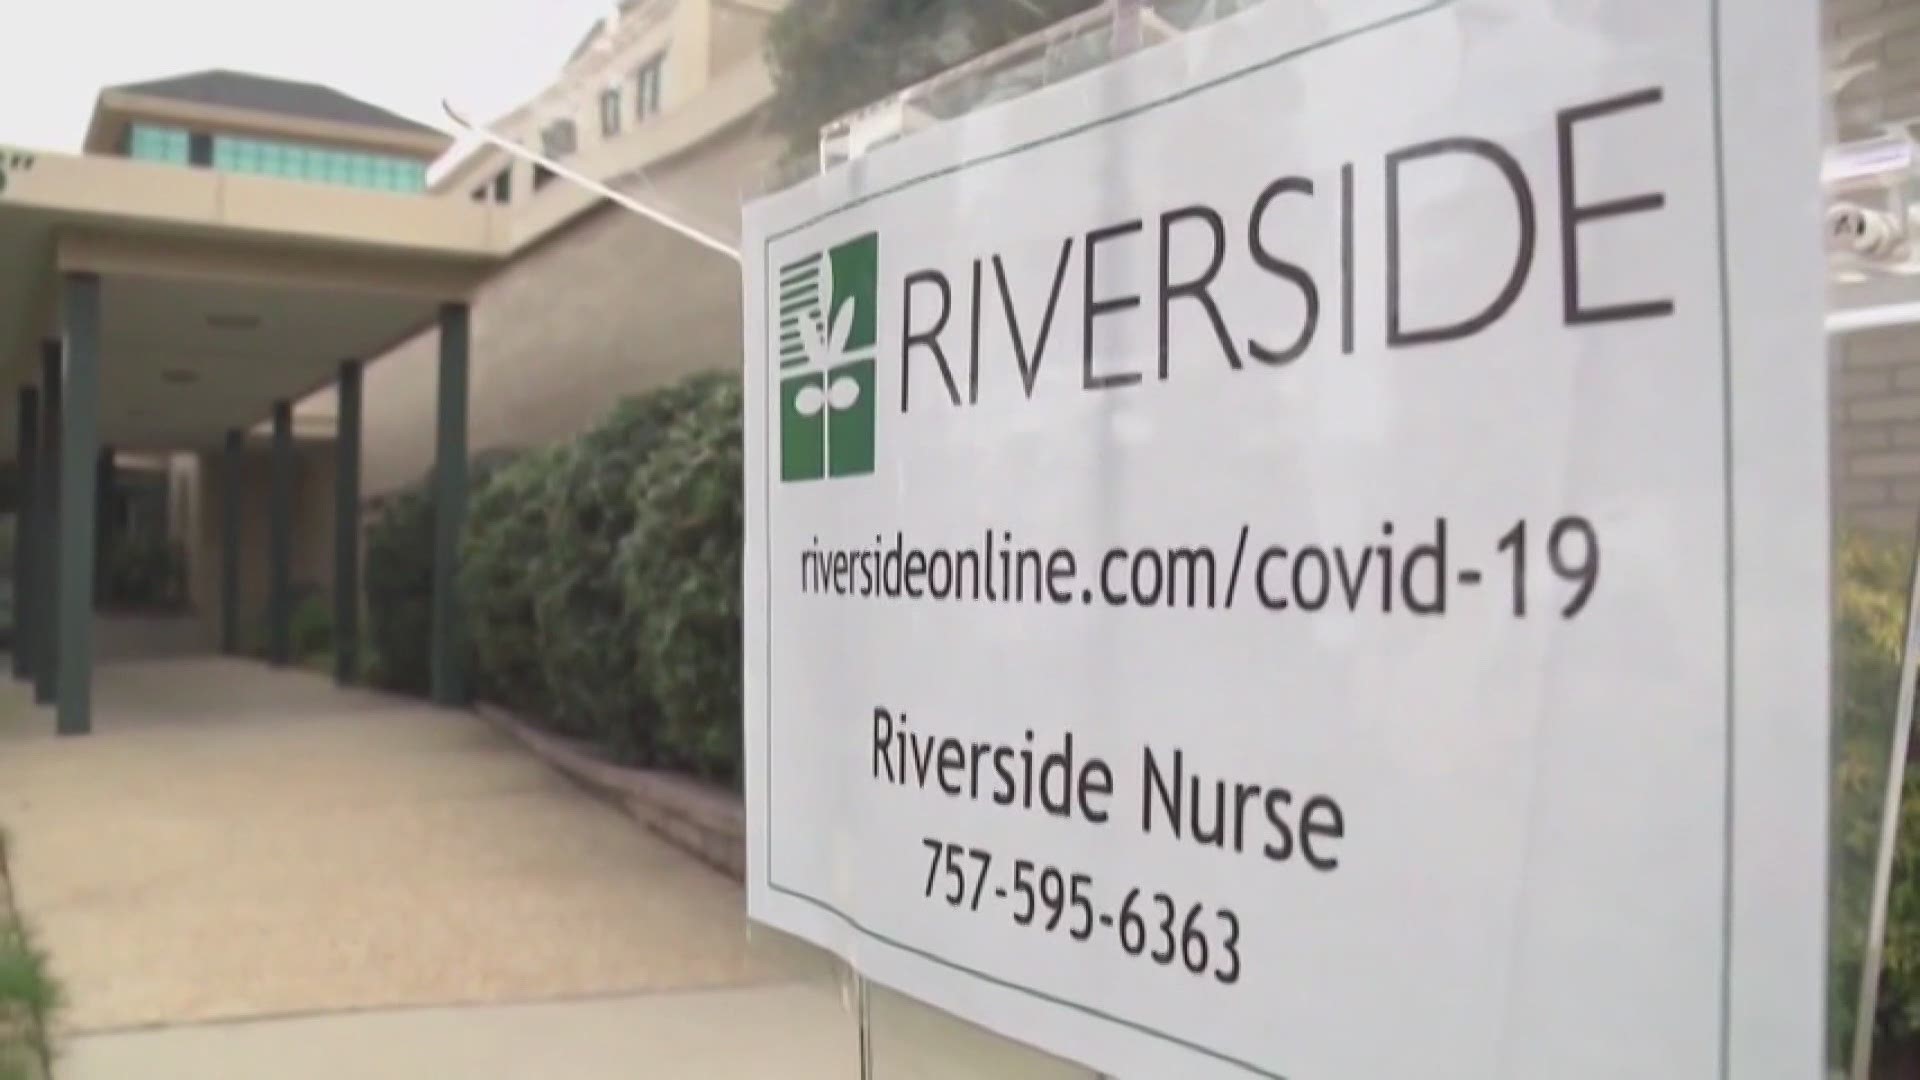 13News Now Anne Sparaco reports that Riverside Health System is one step closer to Phase 1c after it administered its 100,000th COVID-19 vaccine.